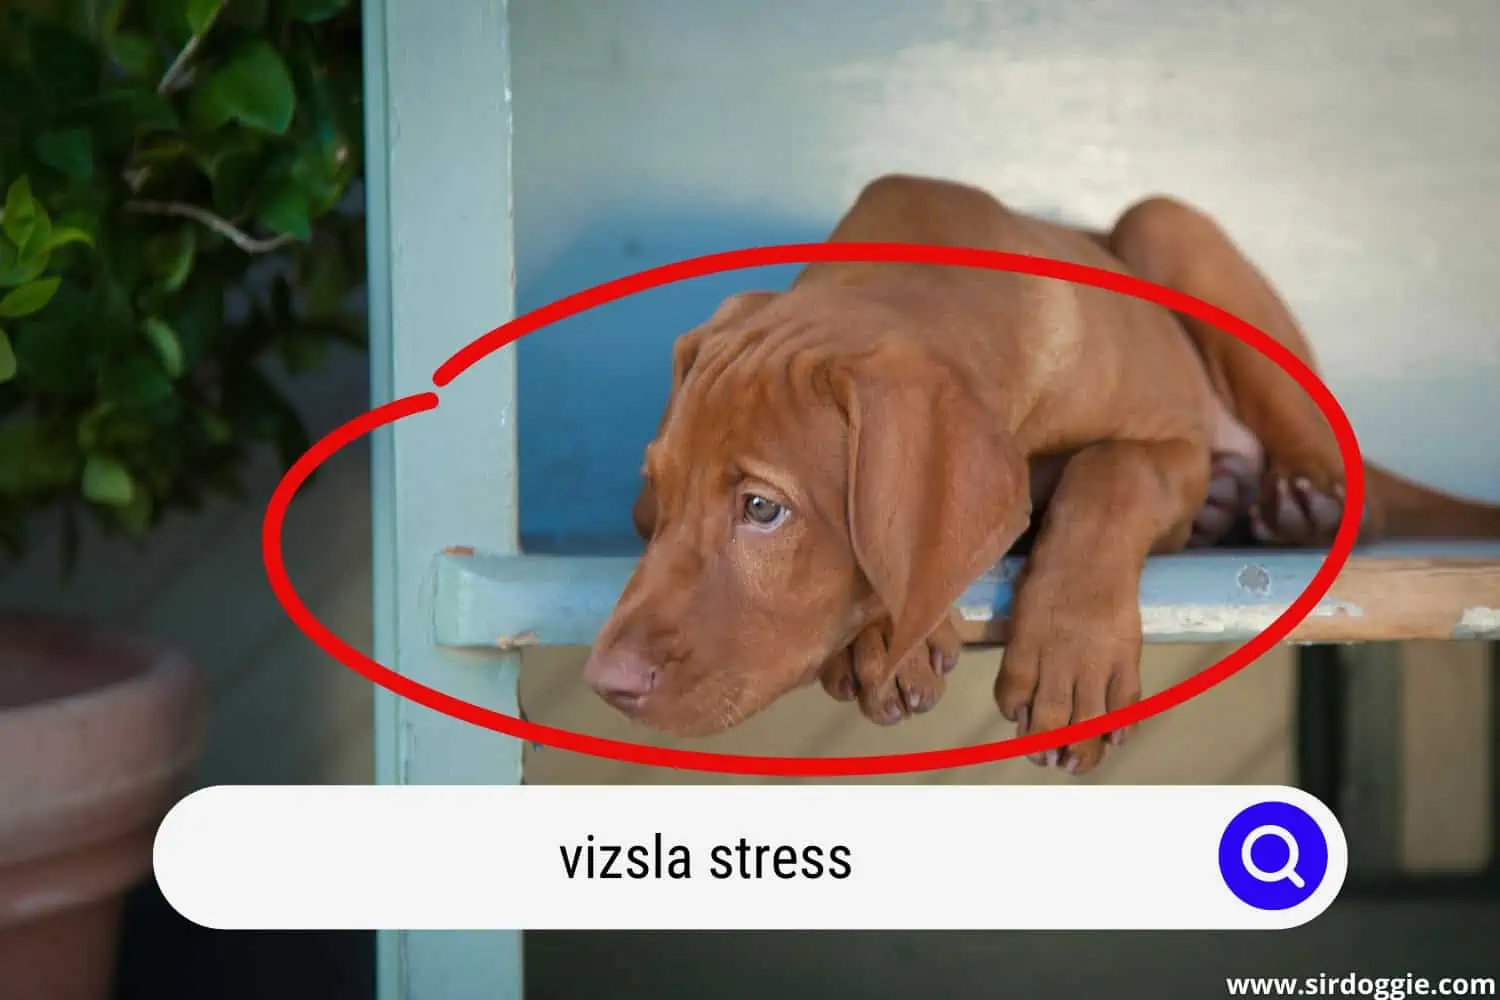 A Vizsla puppy looking stress while lying in a cabinet